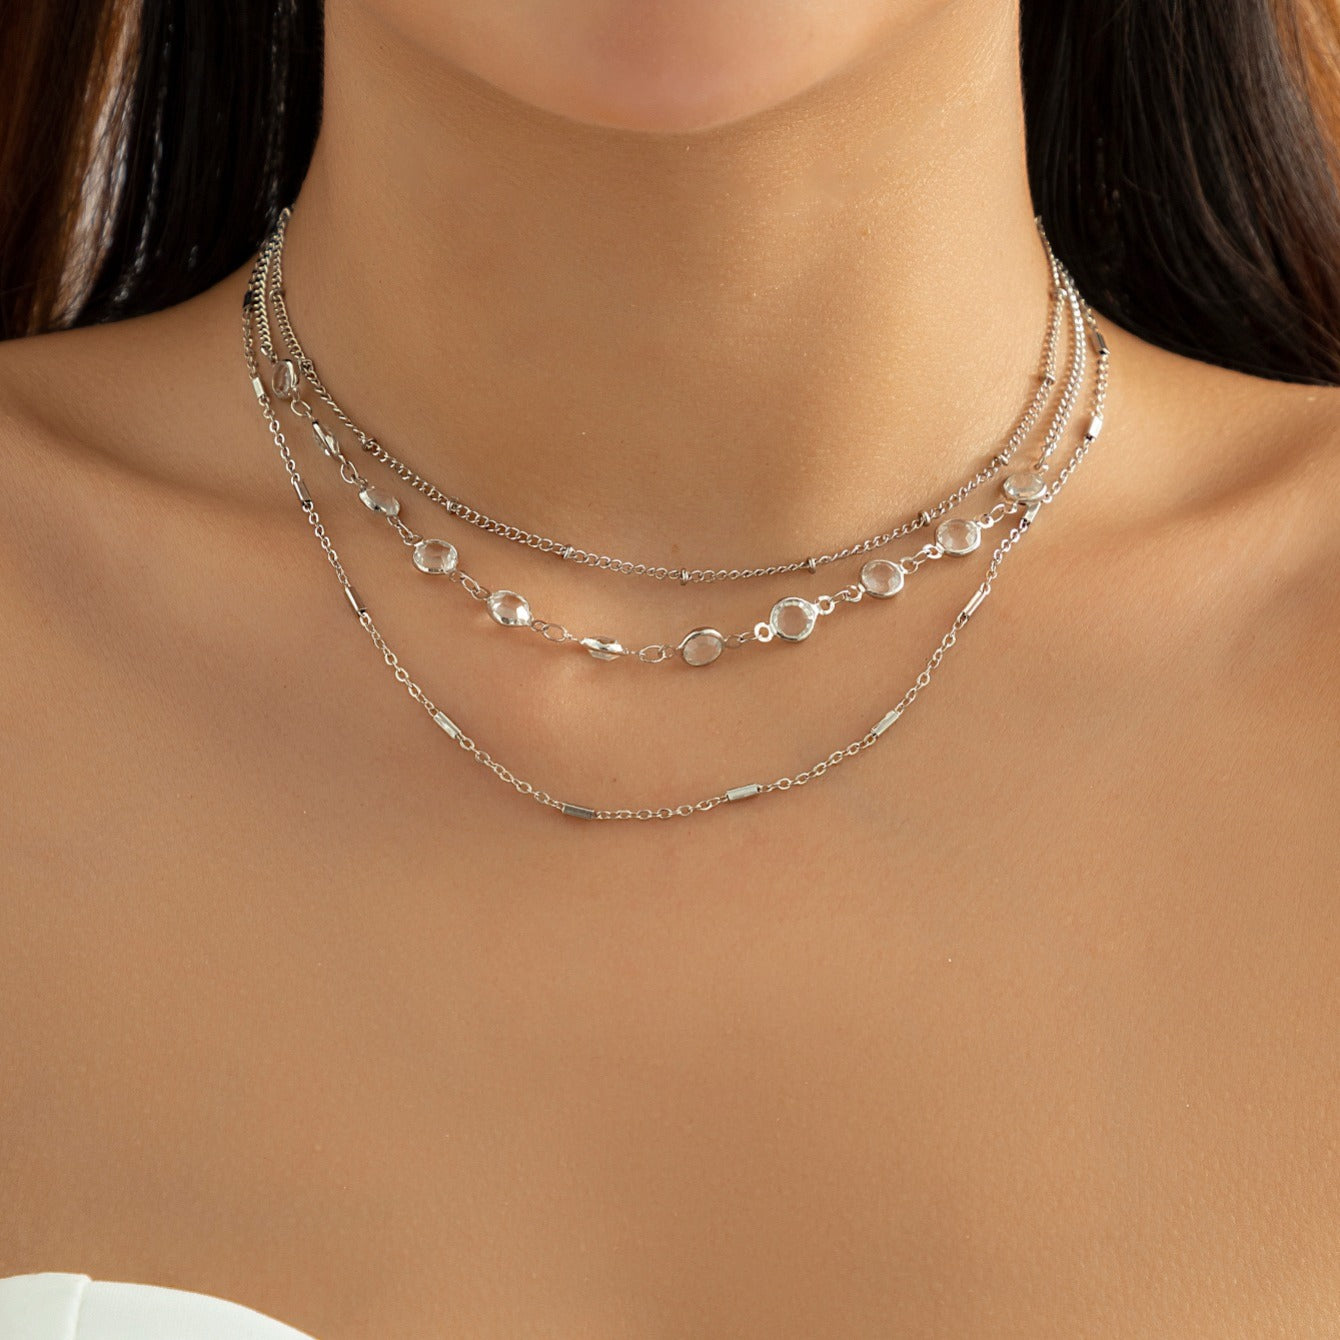 Elegant 3-Piece Crystal Overlay Necklace Set - Perfect for the Fashionable Lady!